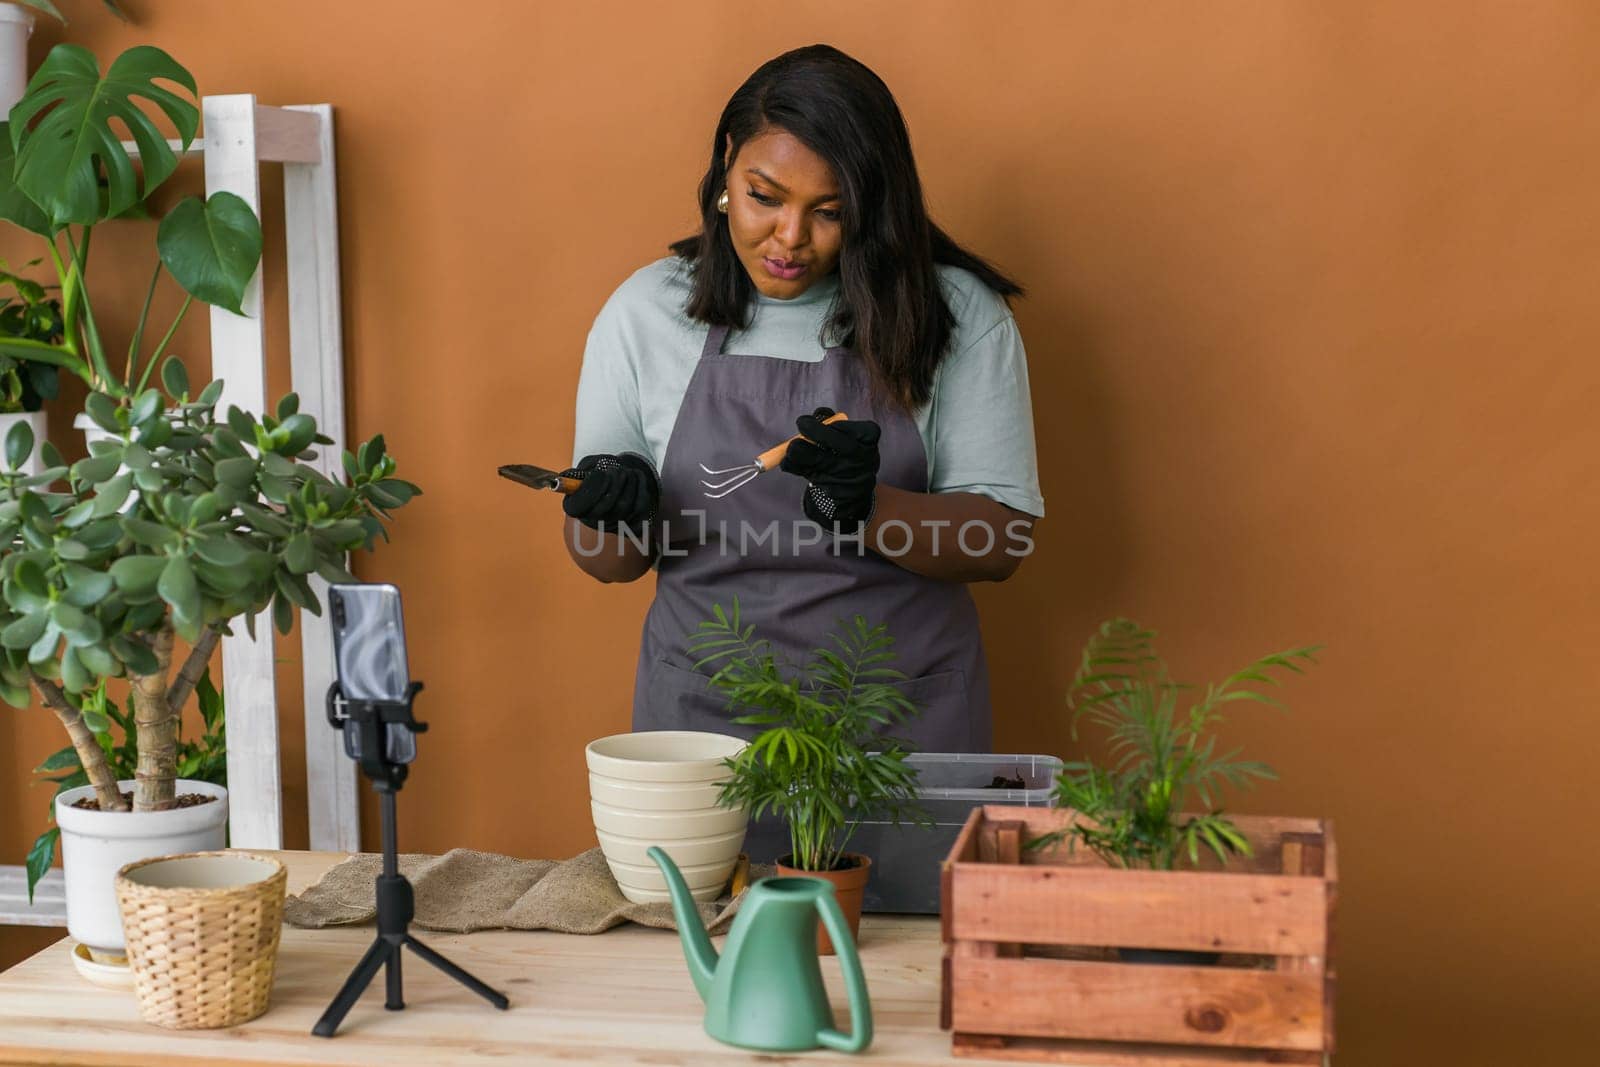 African american girl blogger influencer work on home video camera selfie shoot filming take care home plants and transplanting plant in flowerpot. Home gardening and florist concept. by Satura86